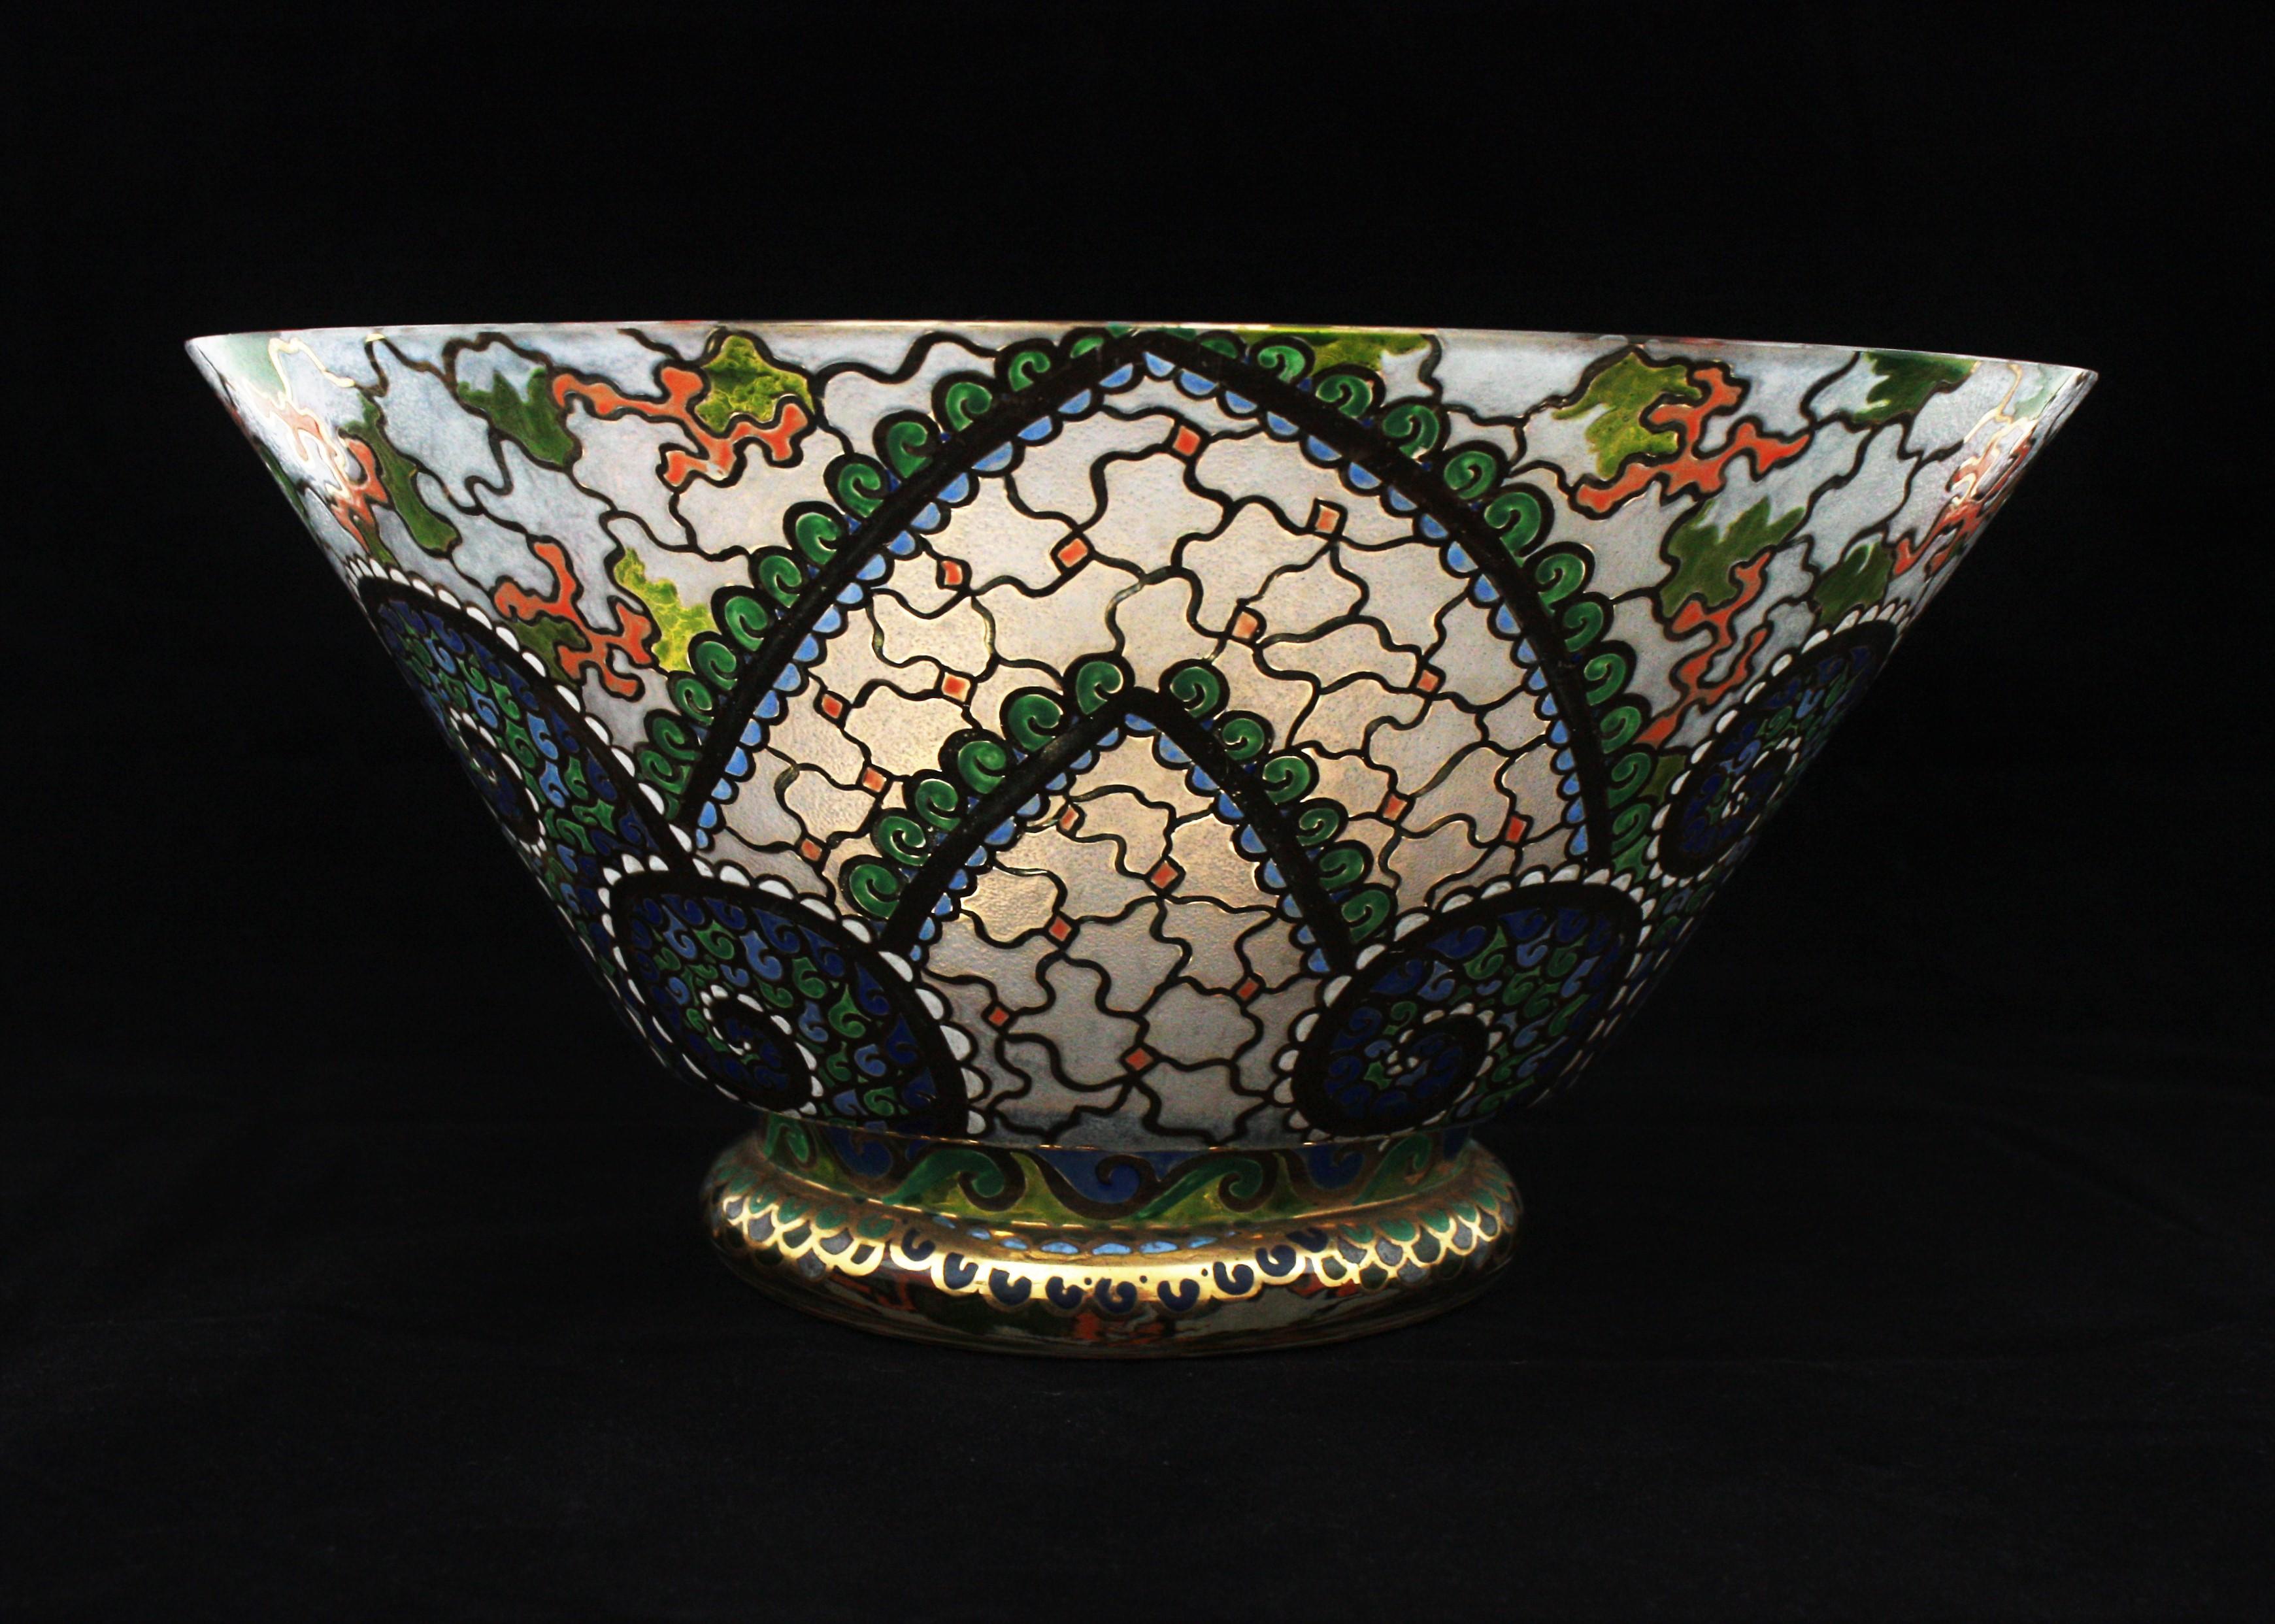 Beautiful Art Deco period hand painted blown glass centerpiece / vase by Riera, Spain, 1930s.
This colorful filigree glass decorative footed bowl has gothic inspired ornamentations in green, orange and blue colors. Exquisite hand painted enamel